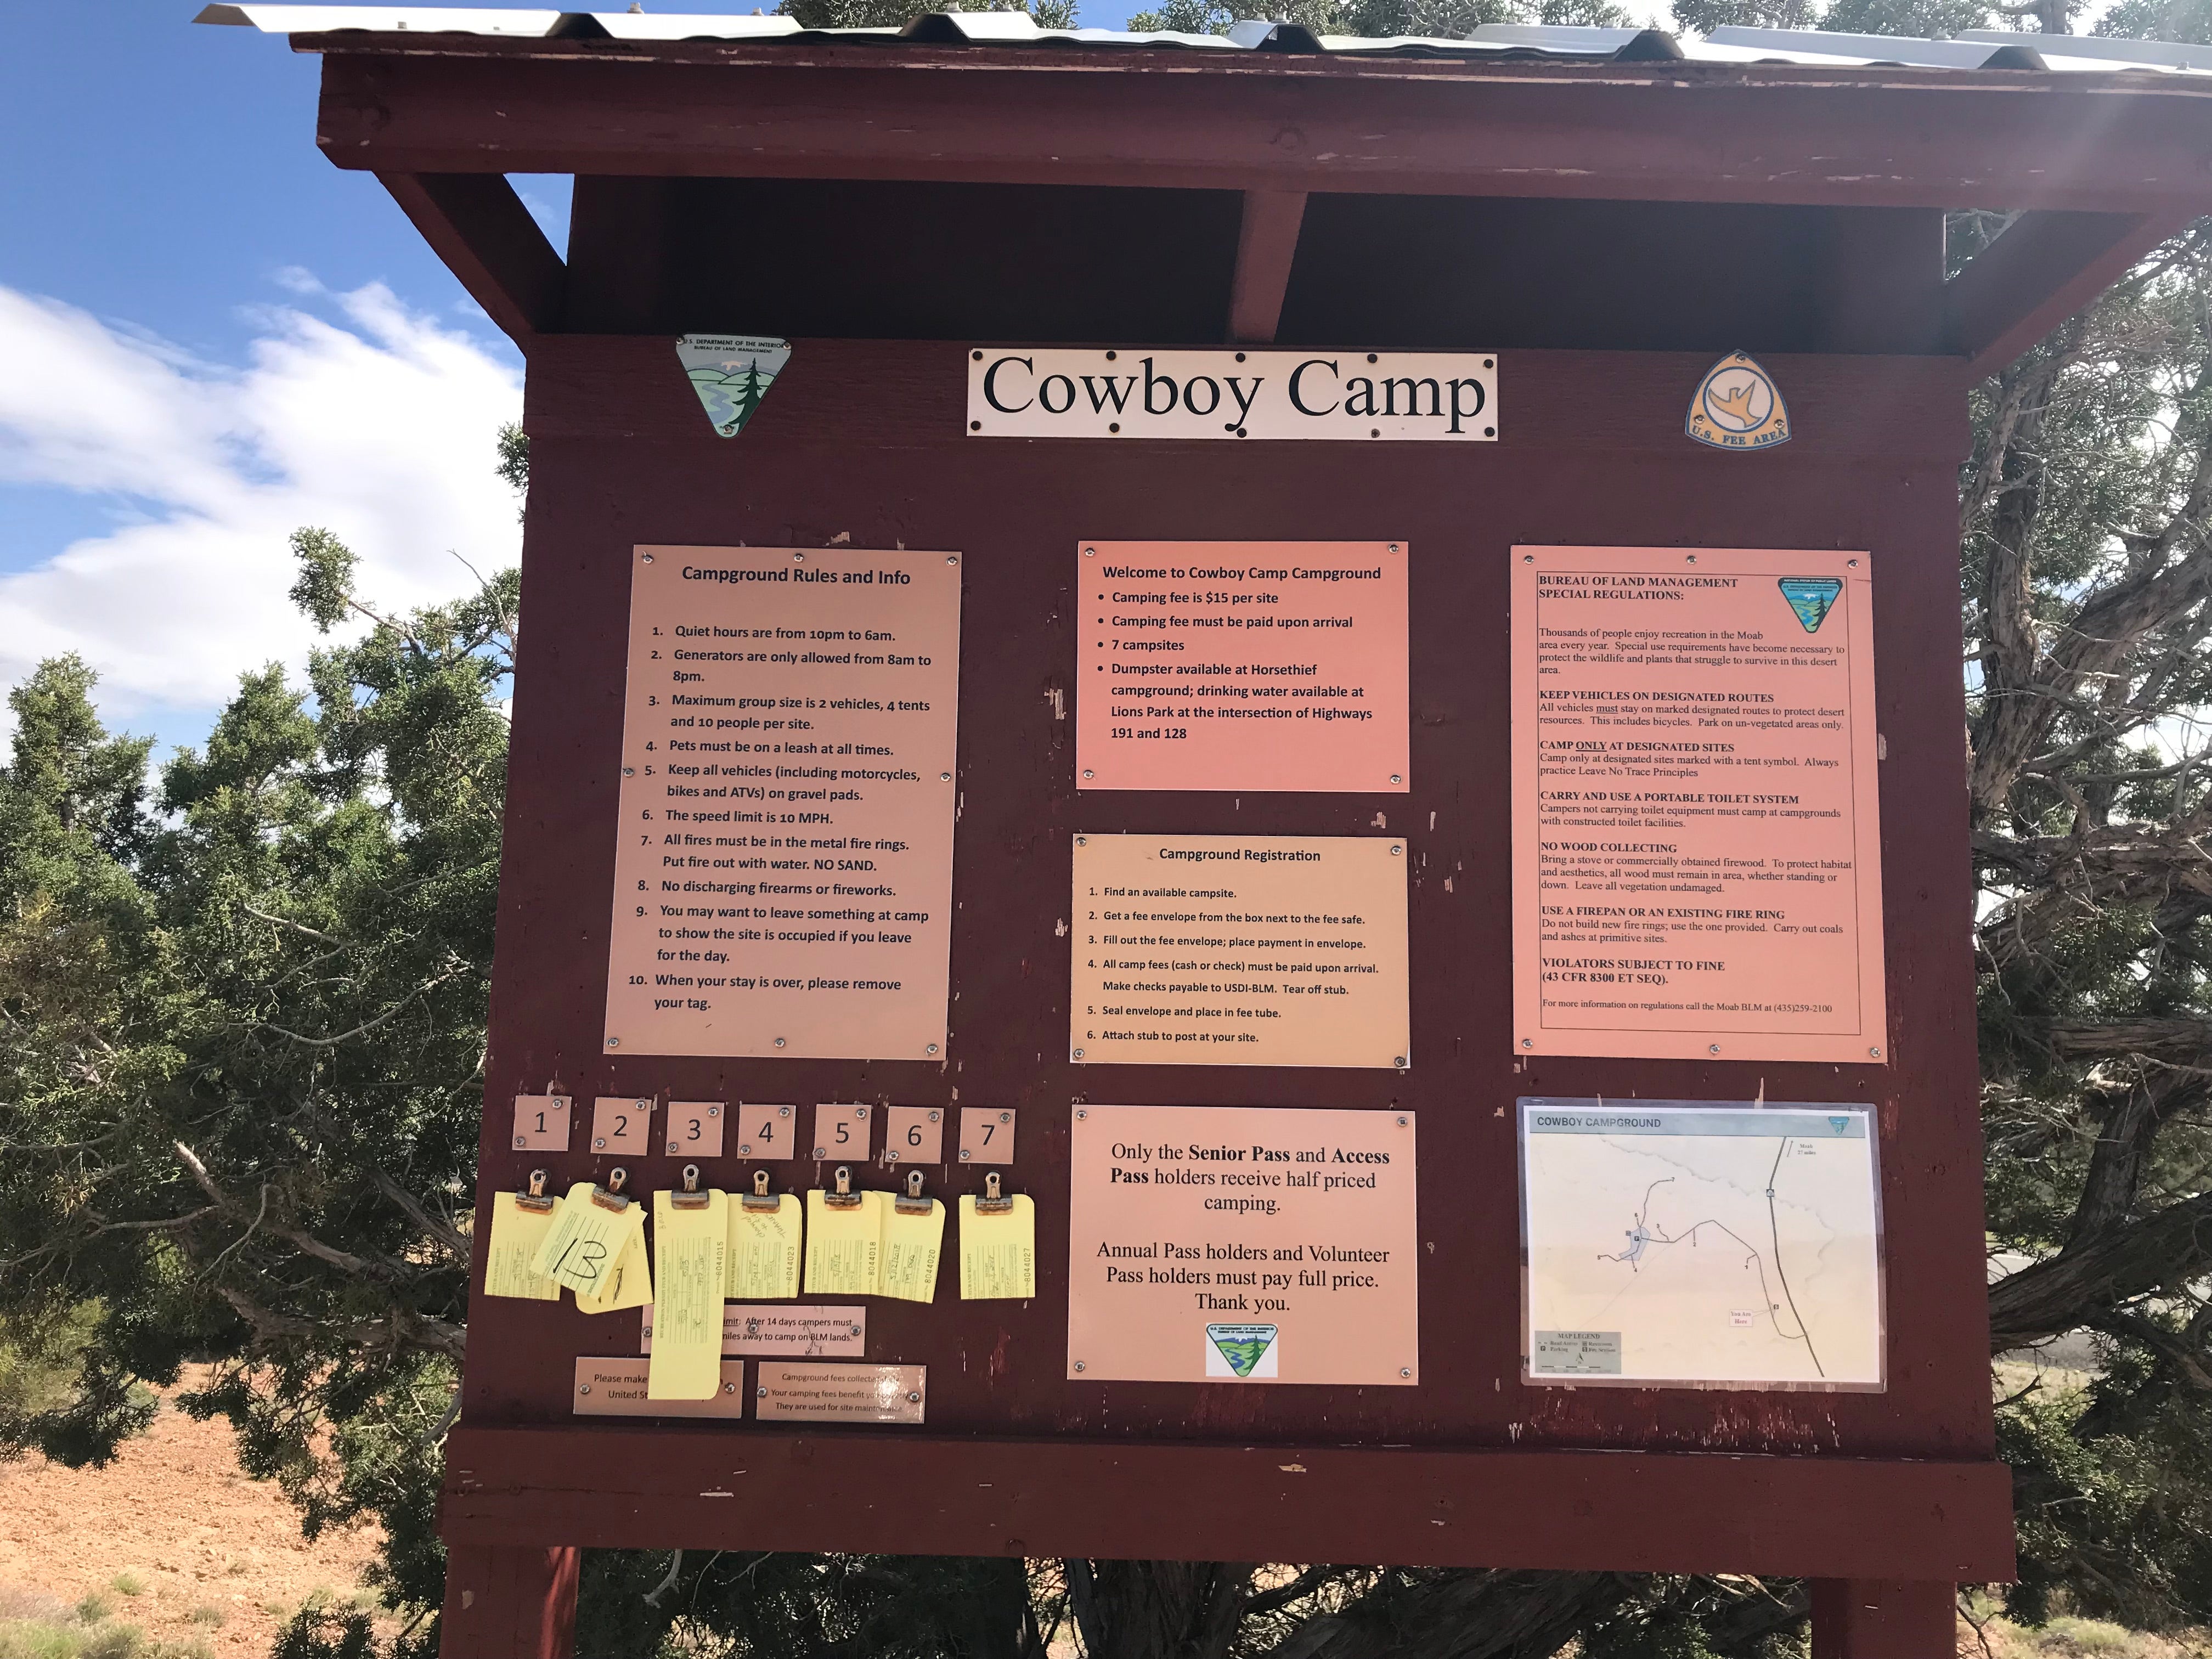 Cowboy Camp pay station.  I liked the pay stubs in yellow being visible here so you can easily see what is available and what is not without driving around the campground.